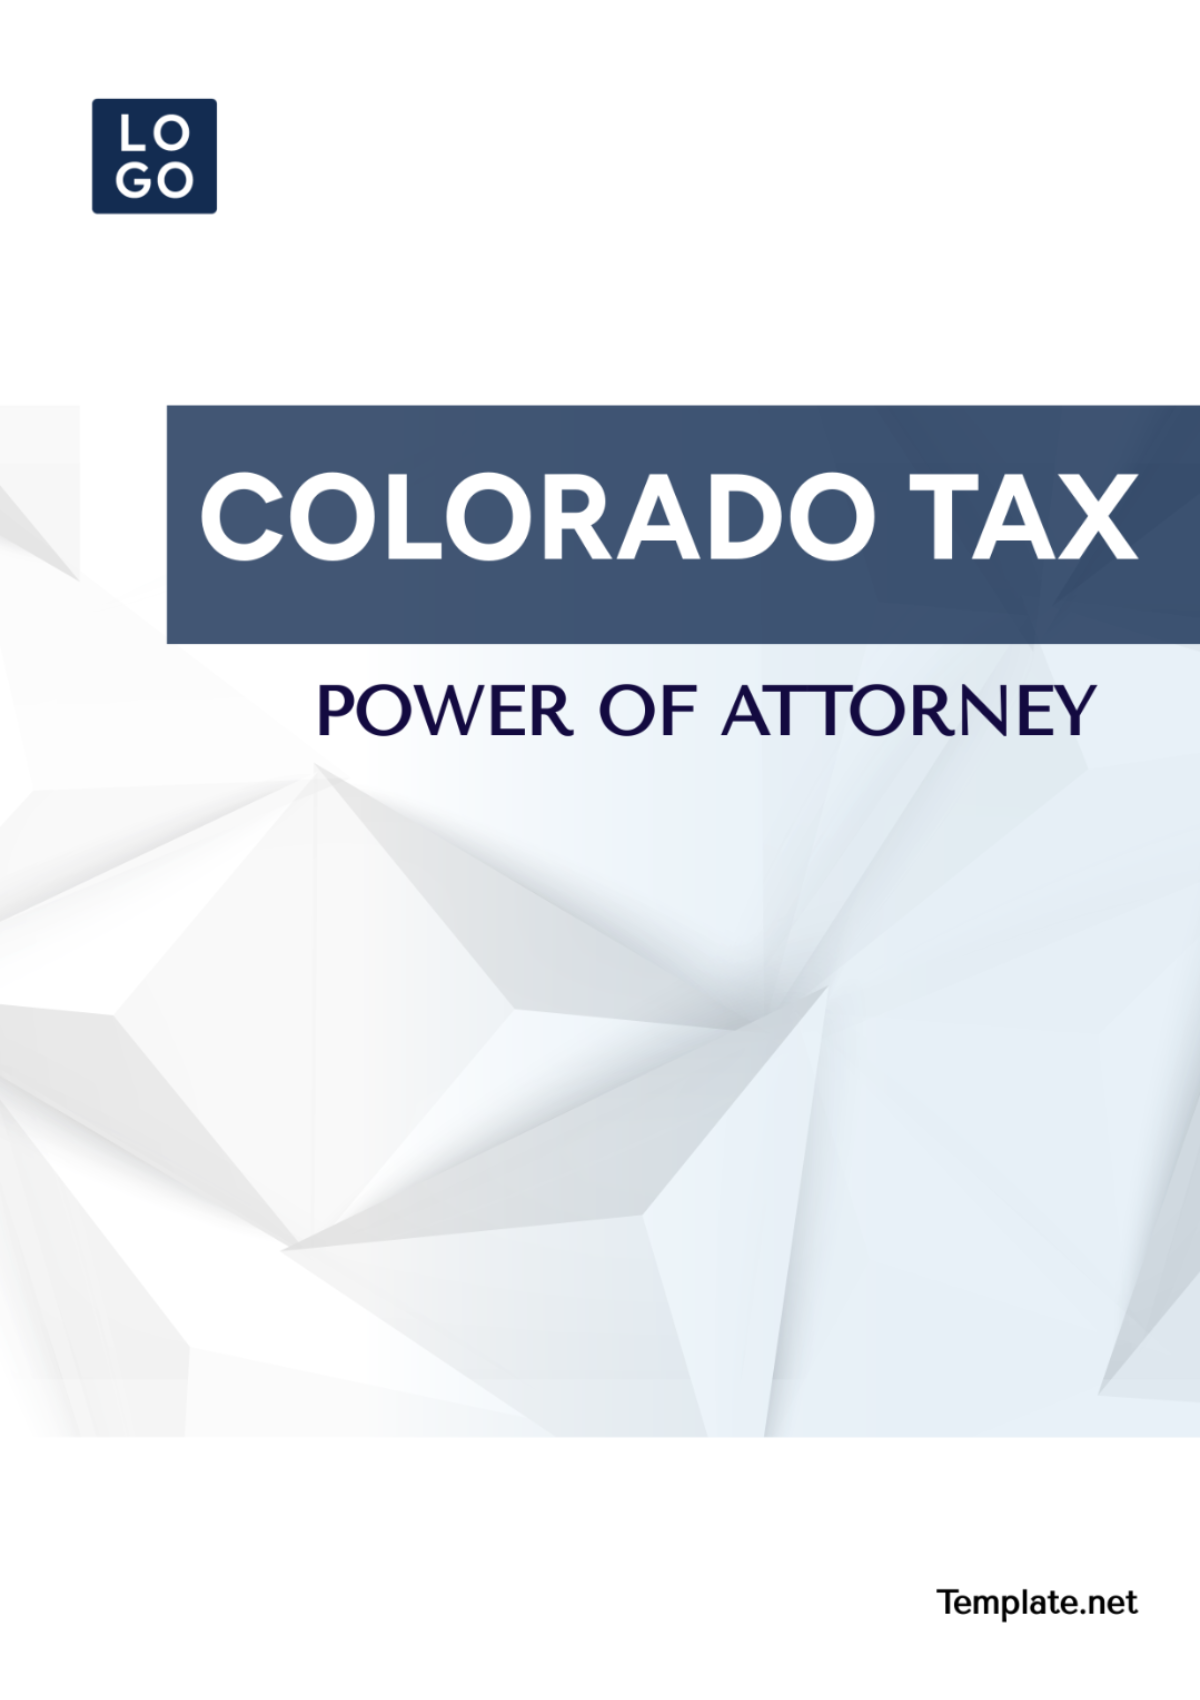 Free Colorado Tax Power of Attorney Template